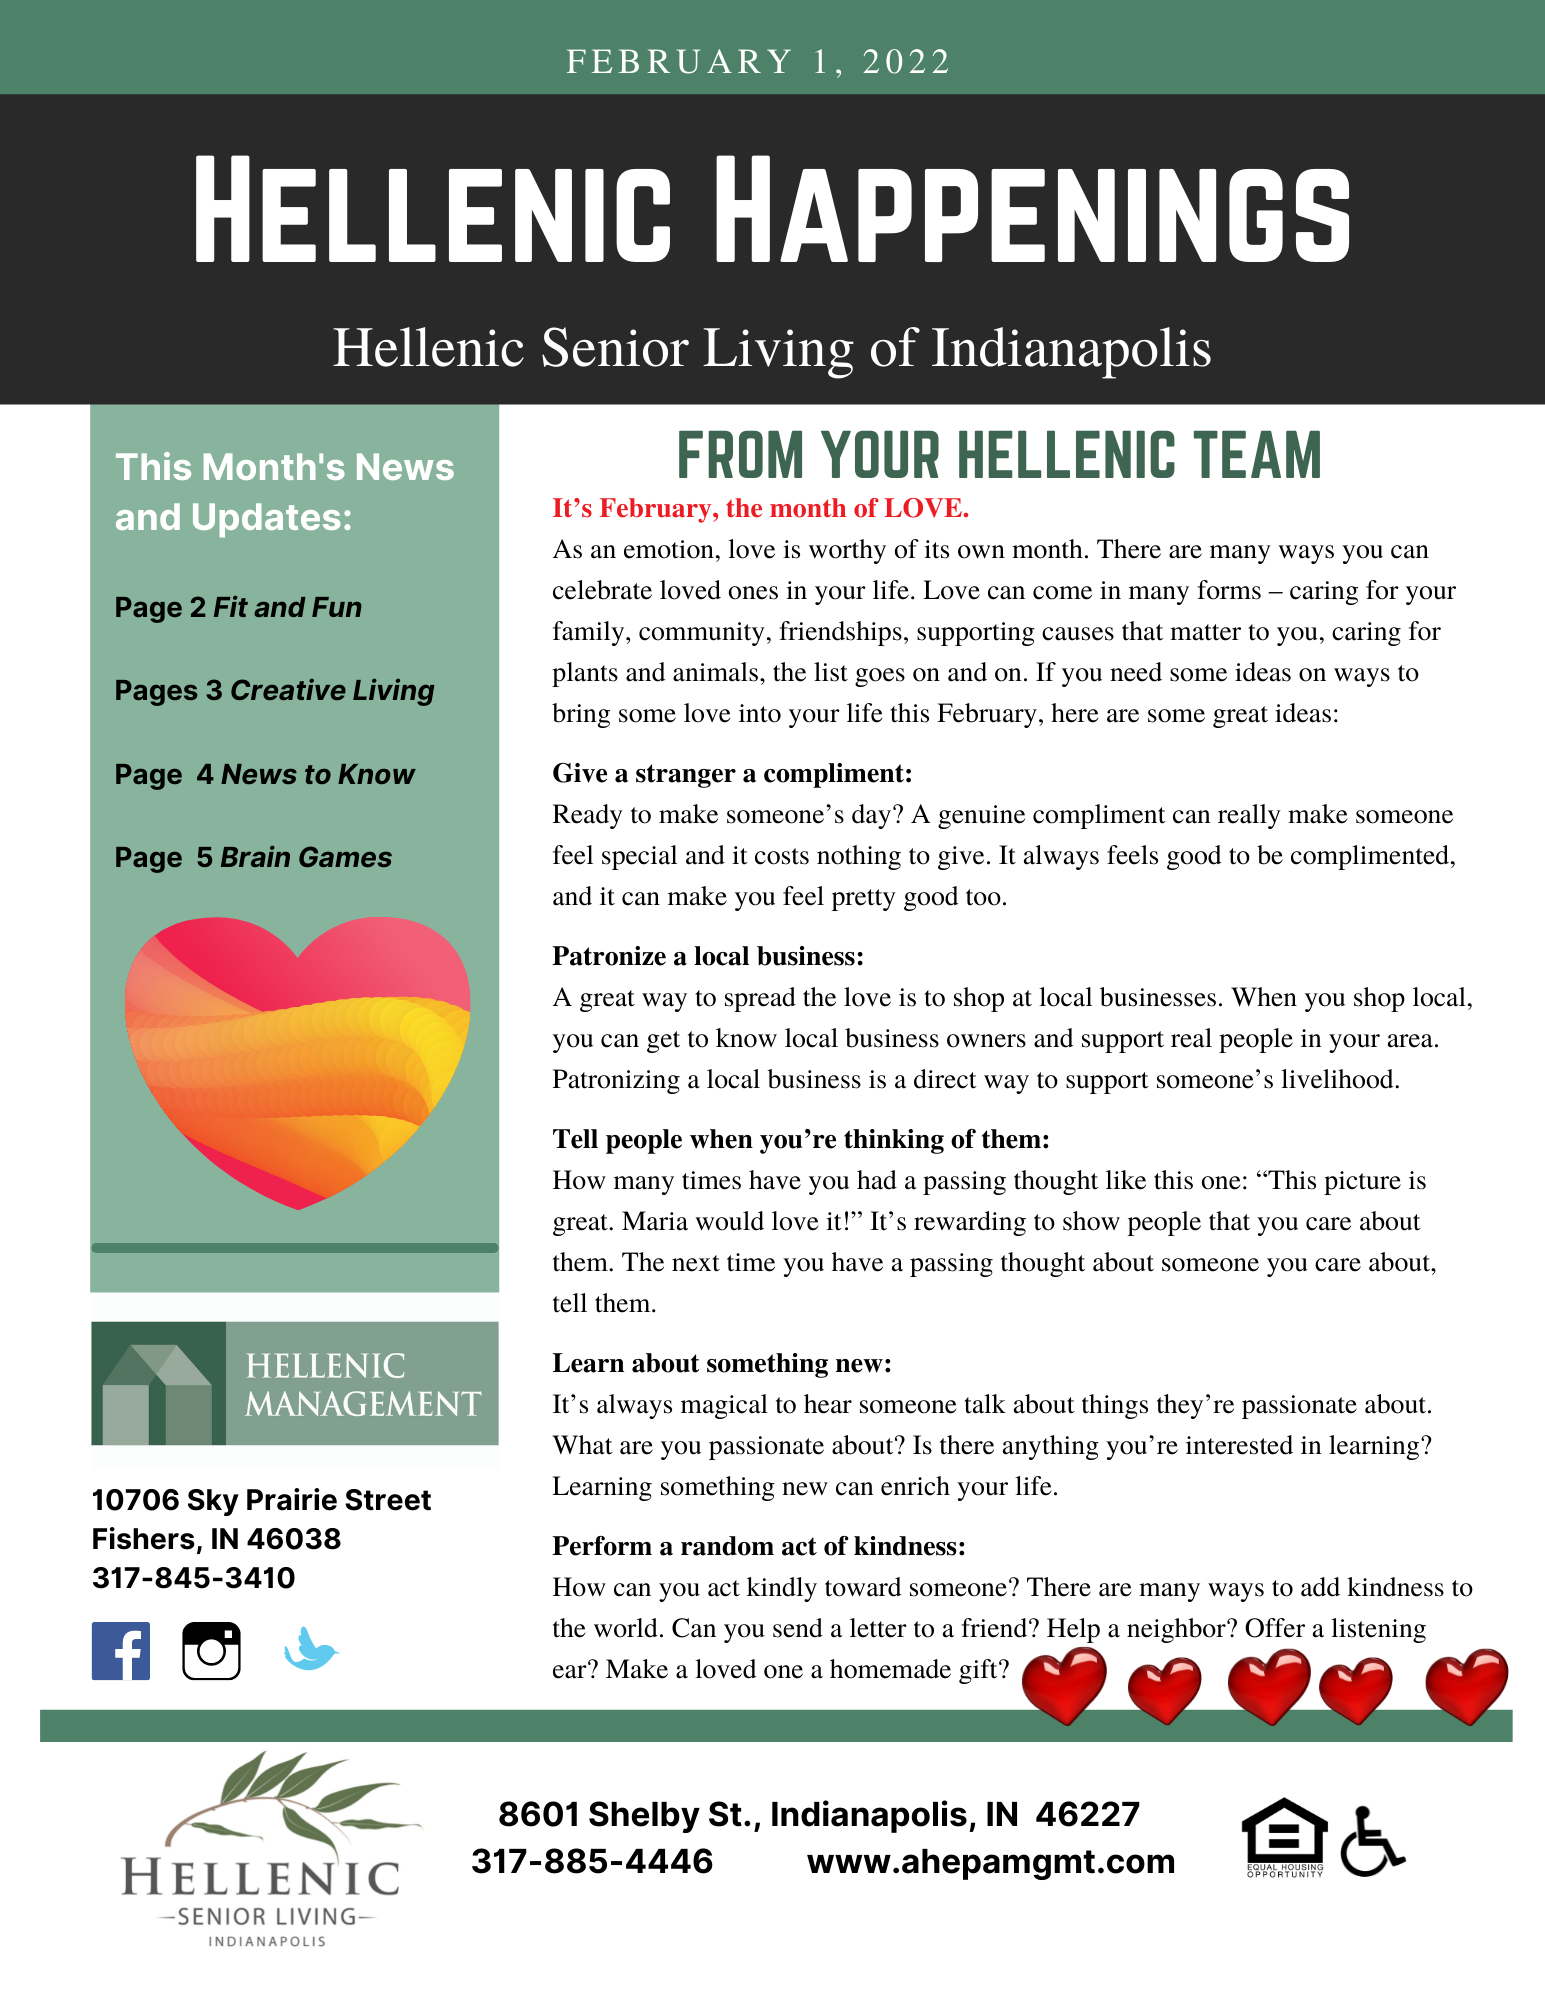 Hellenic Happenings February Newsletter, page 1